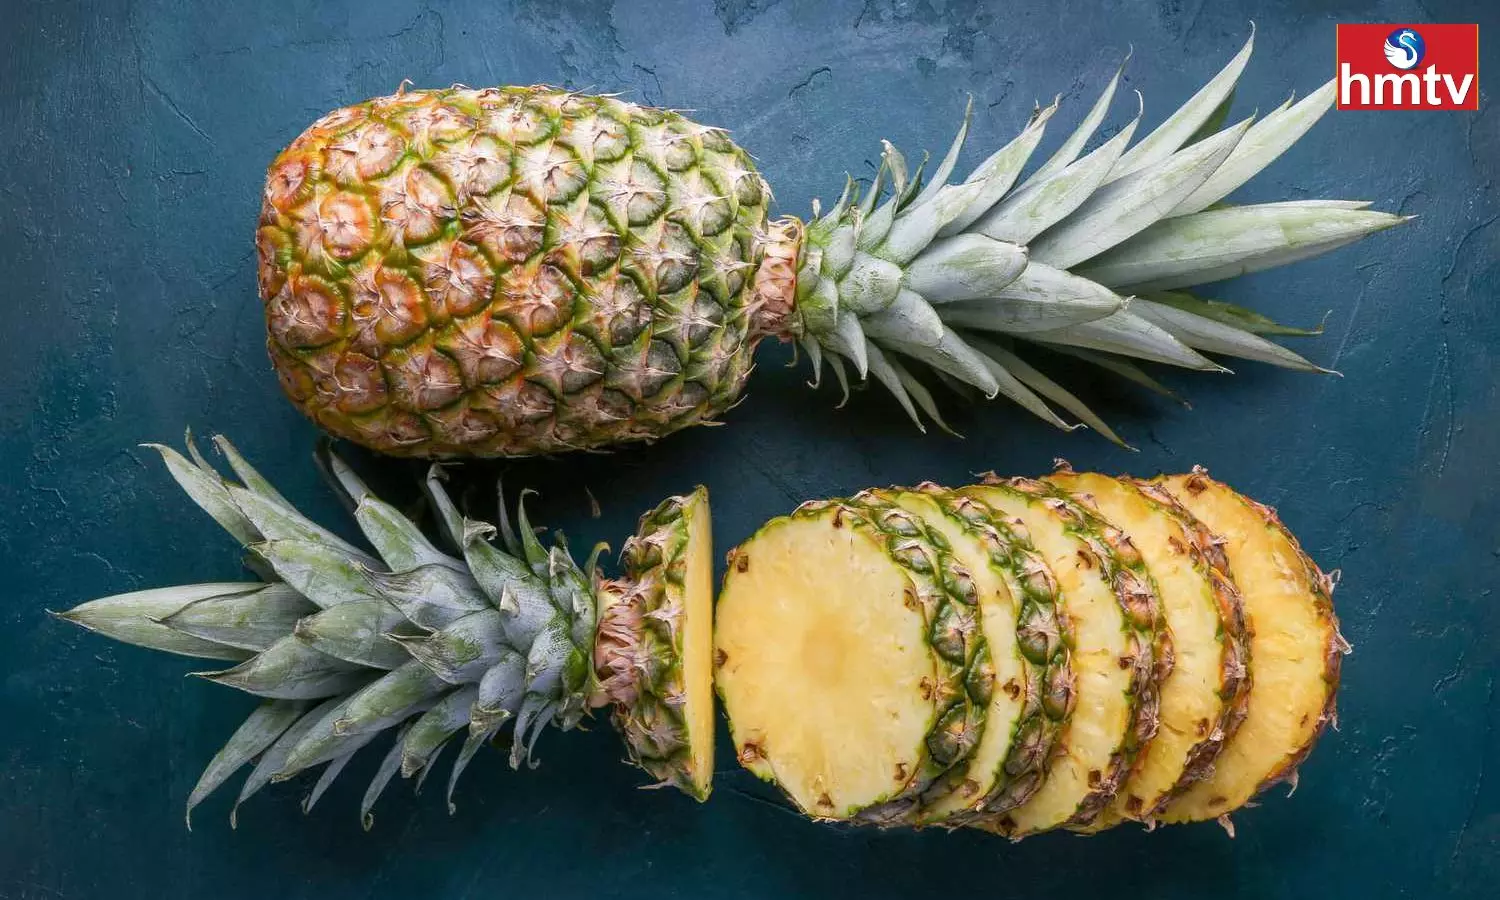 Pineapple is a Tropical Fruit Eating it Gives the Body Exactly 4 Benefits